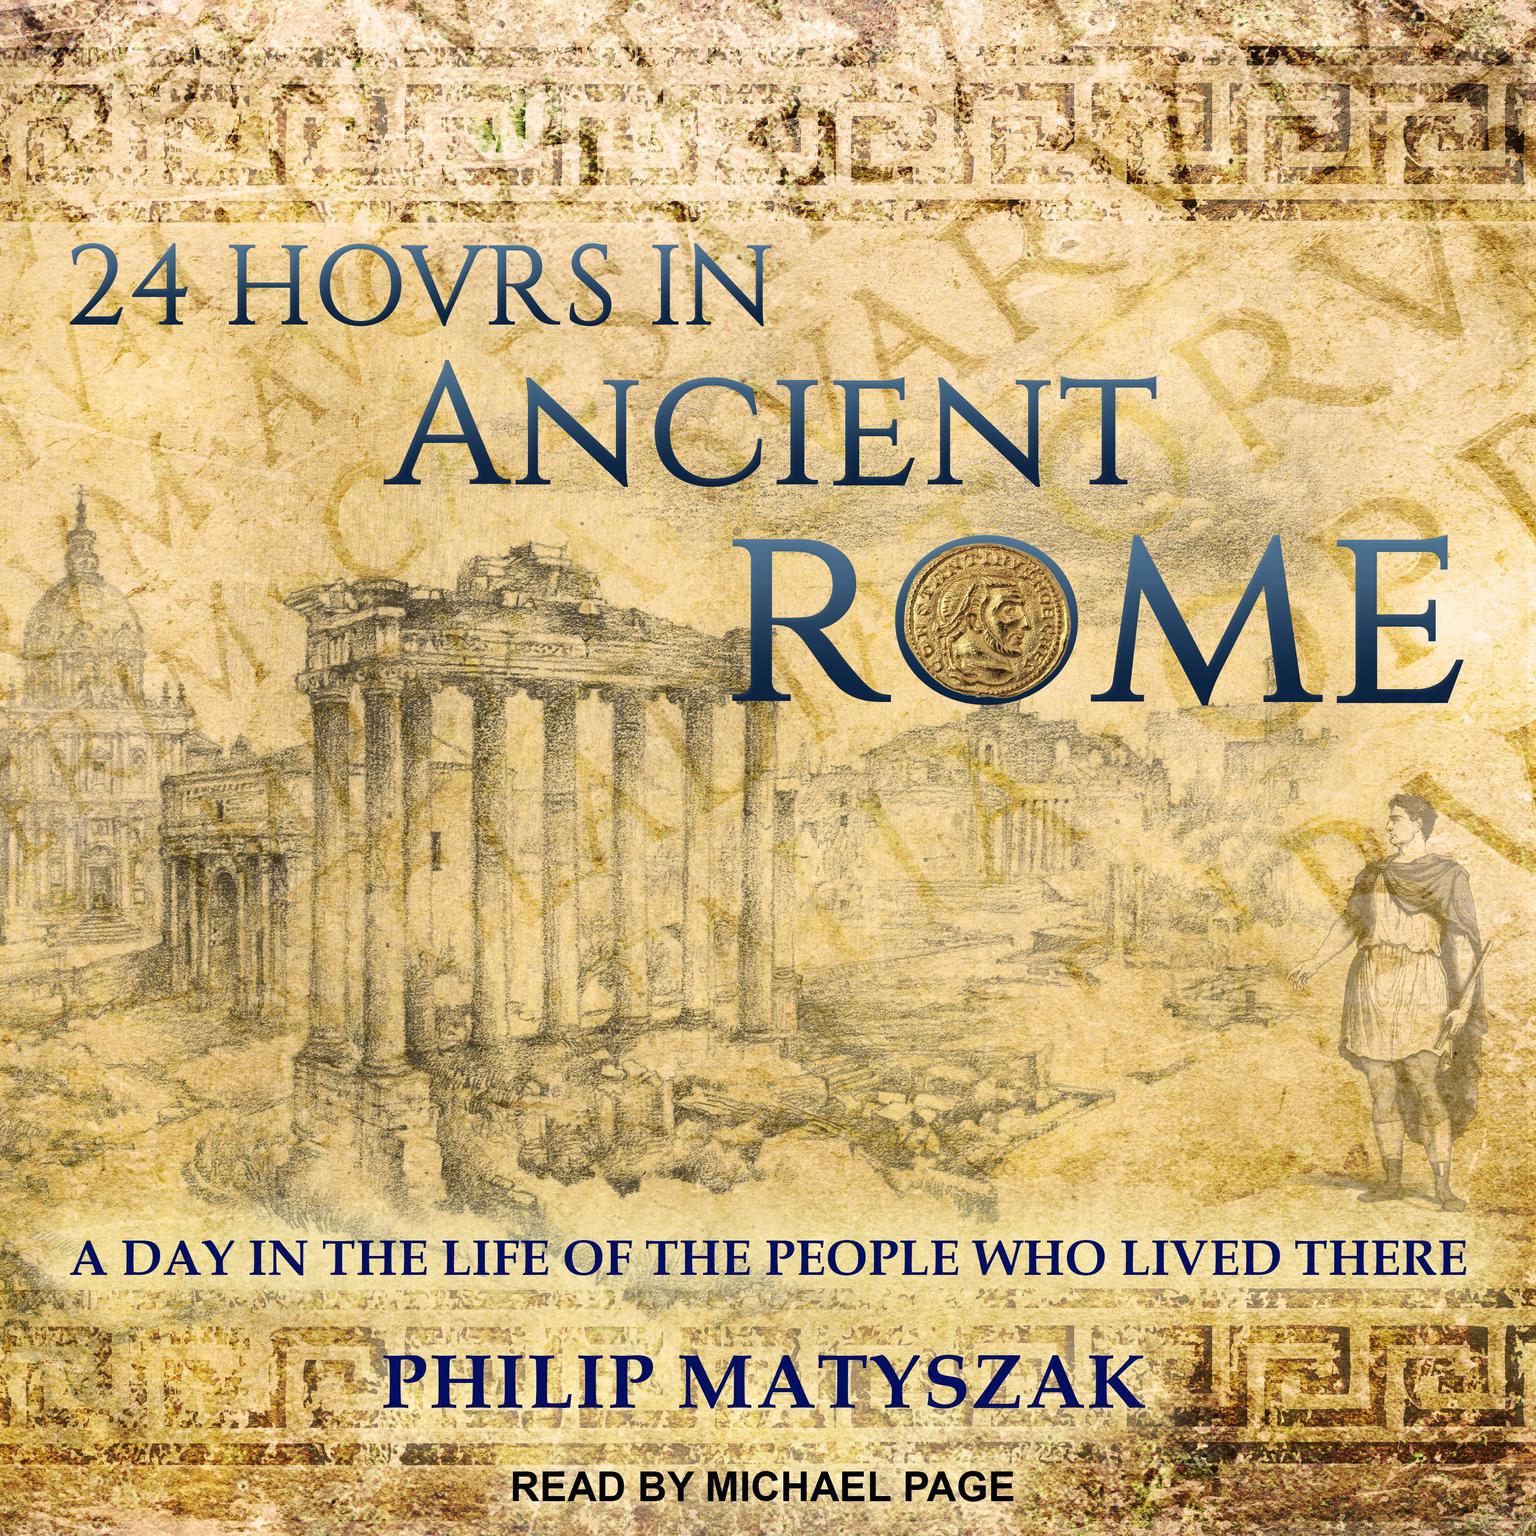 24 Hours in Ancient Rome: A Day in the Life of the People Who Lived There Audiobook, by Philip Matyszak